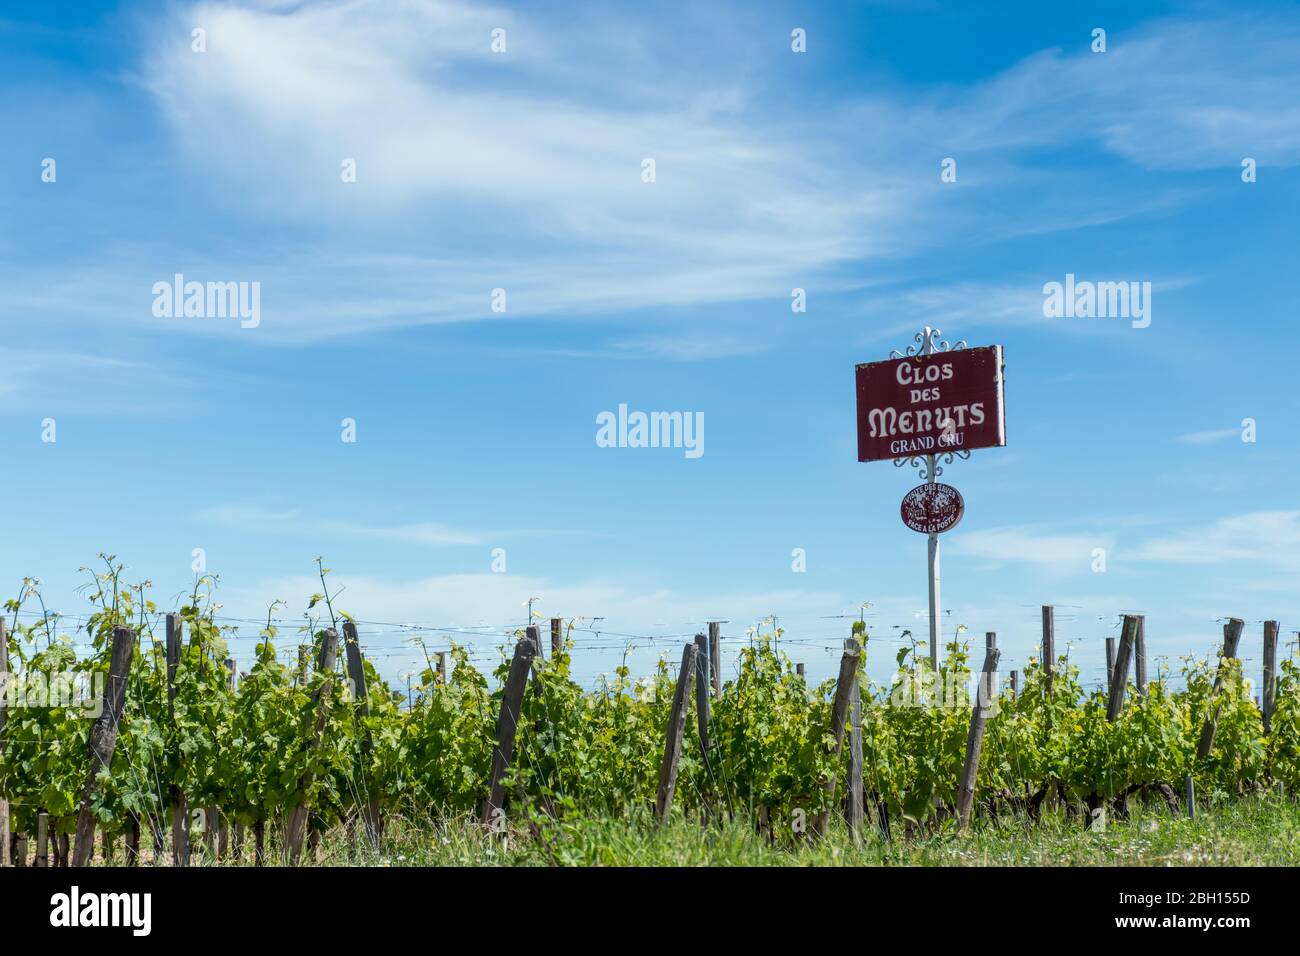 SAINT-EMILION, FRANCE - 05-31-2019: The Clos des Menuts vineyard is a grand cru from Saint Emilion, famous area well known for its great red wines. Stock Photo